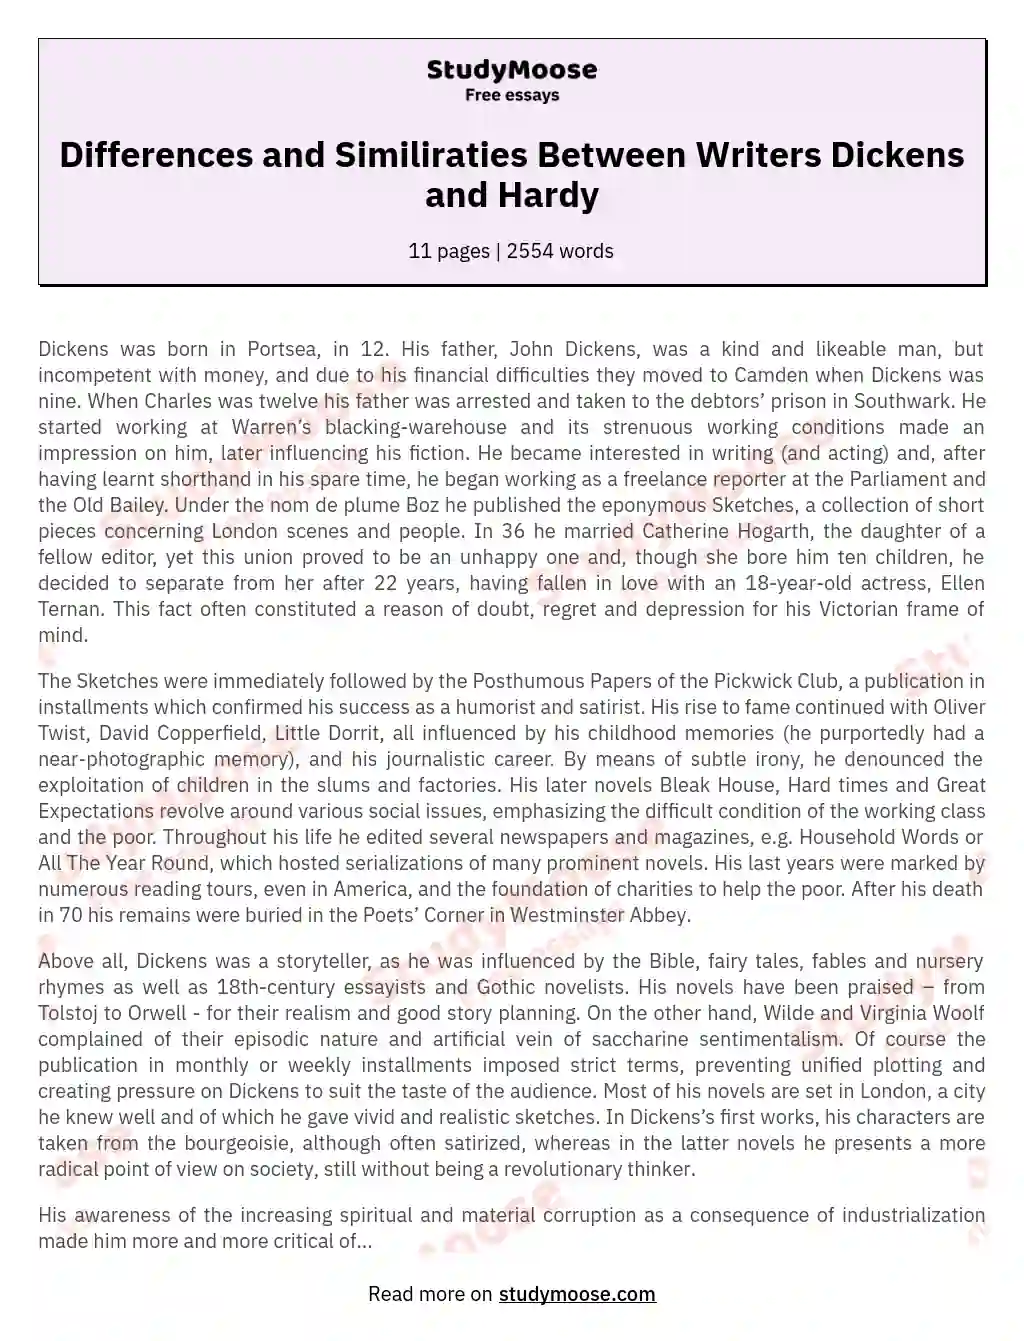 Differences and Similiraties Between Writers Dickens and Hardy essay